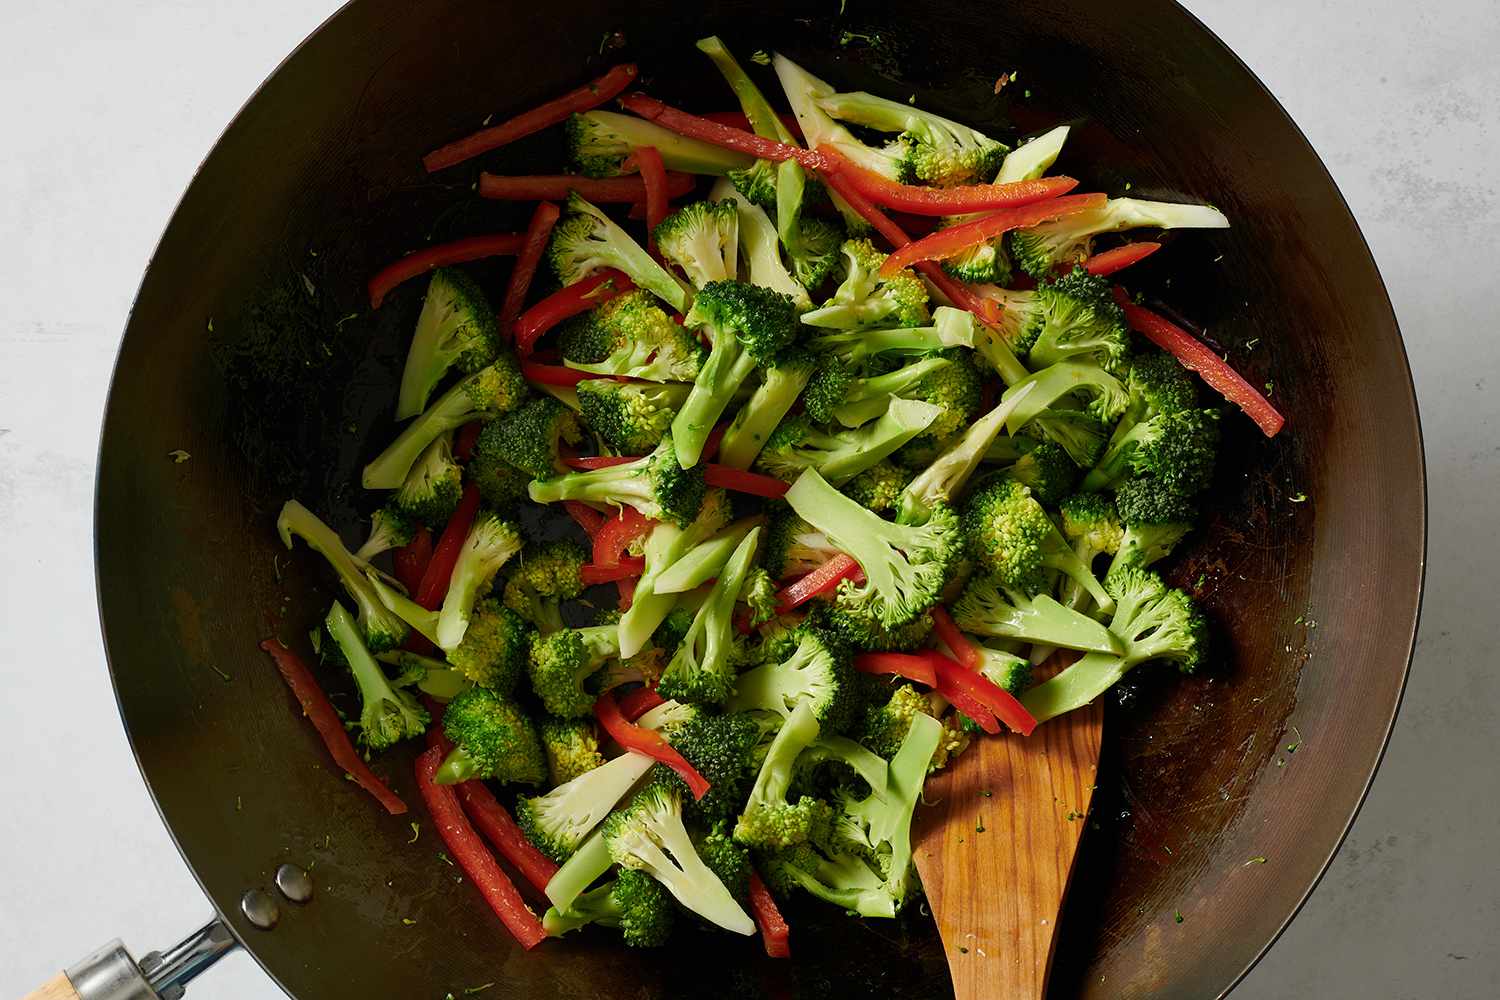 A wok with red pepper and broccoli